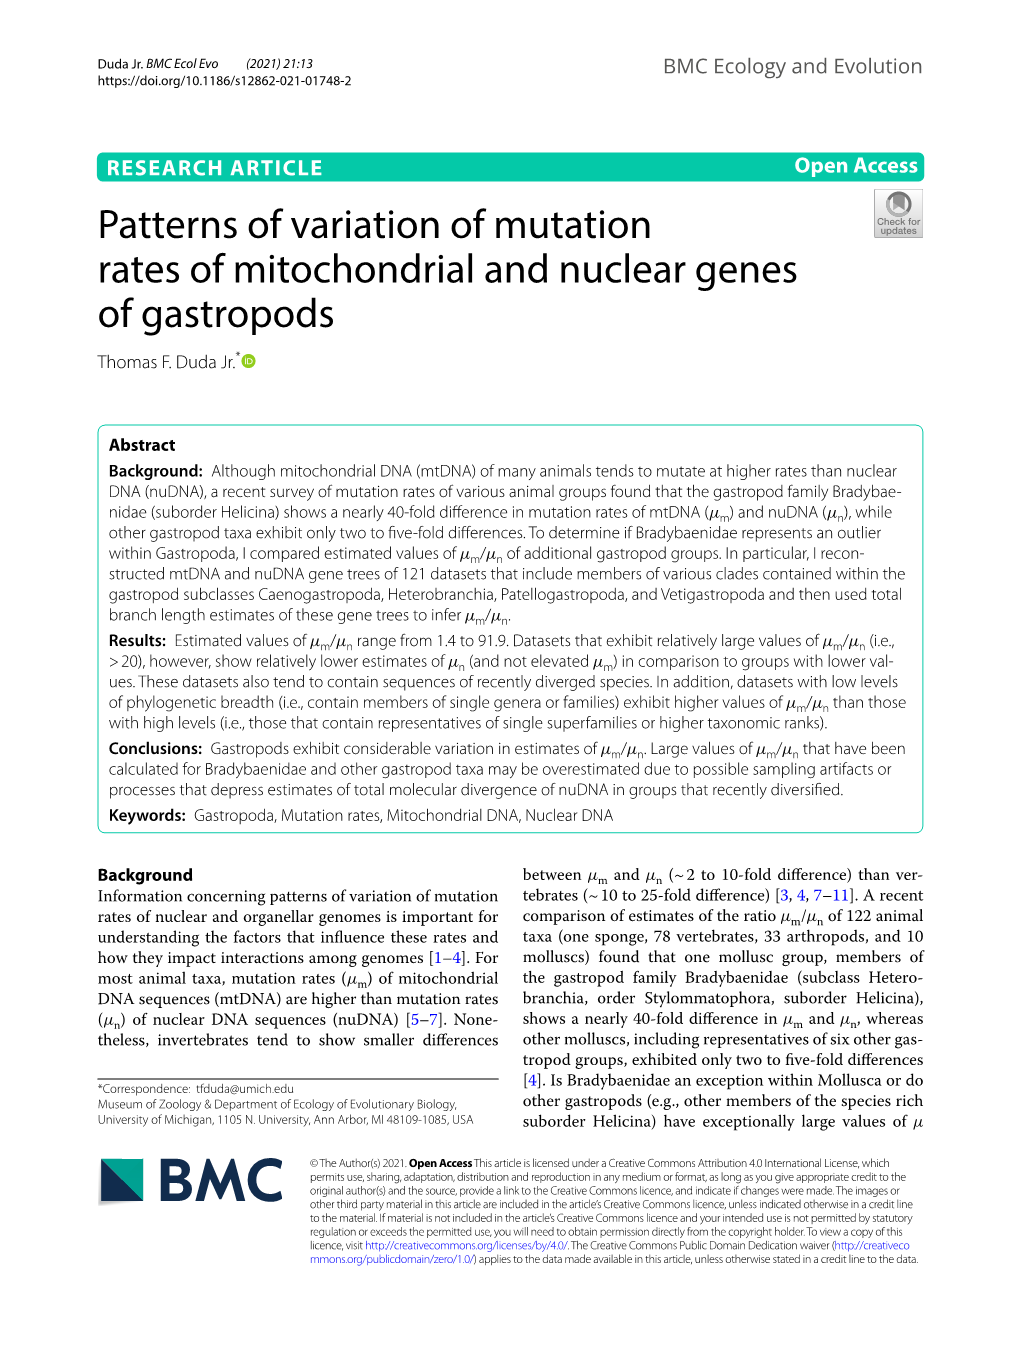 Patterns of Variation of Mutation Rates of Mitochondrial and Nuclear Genes of Gastropods Thomas F